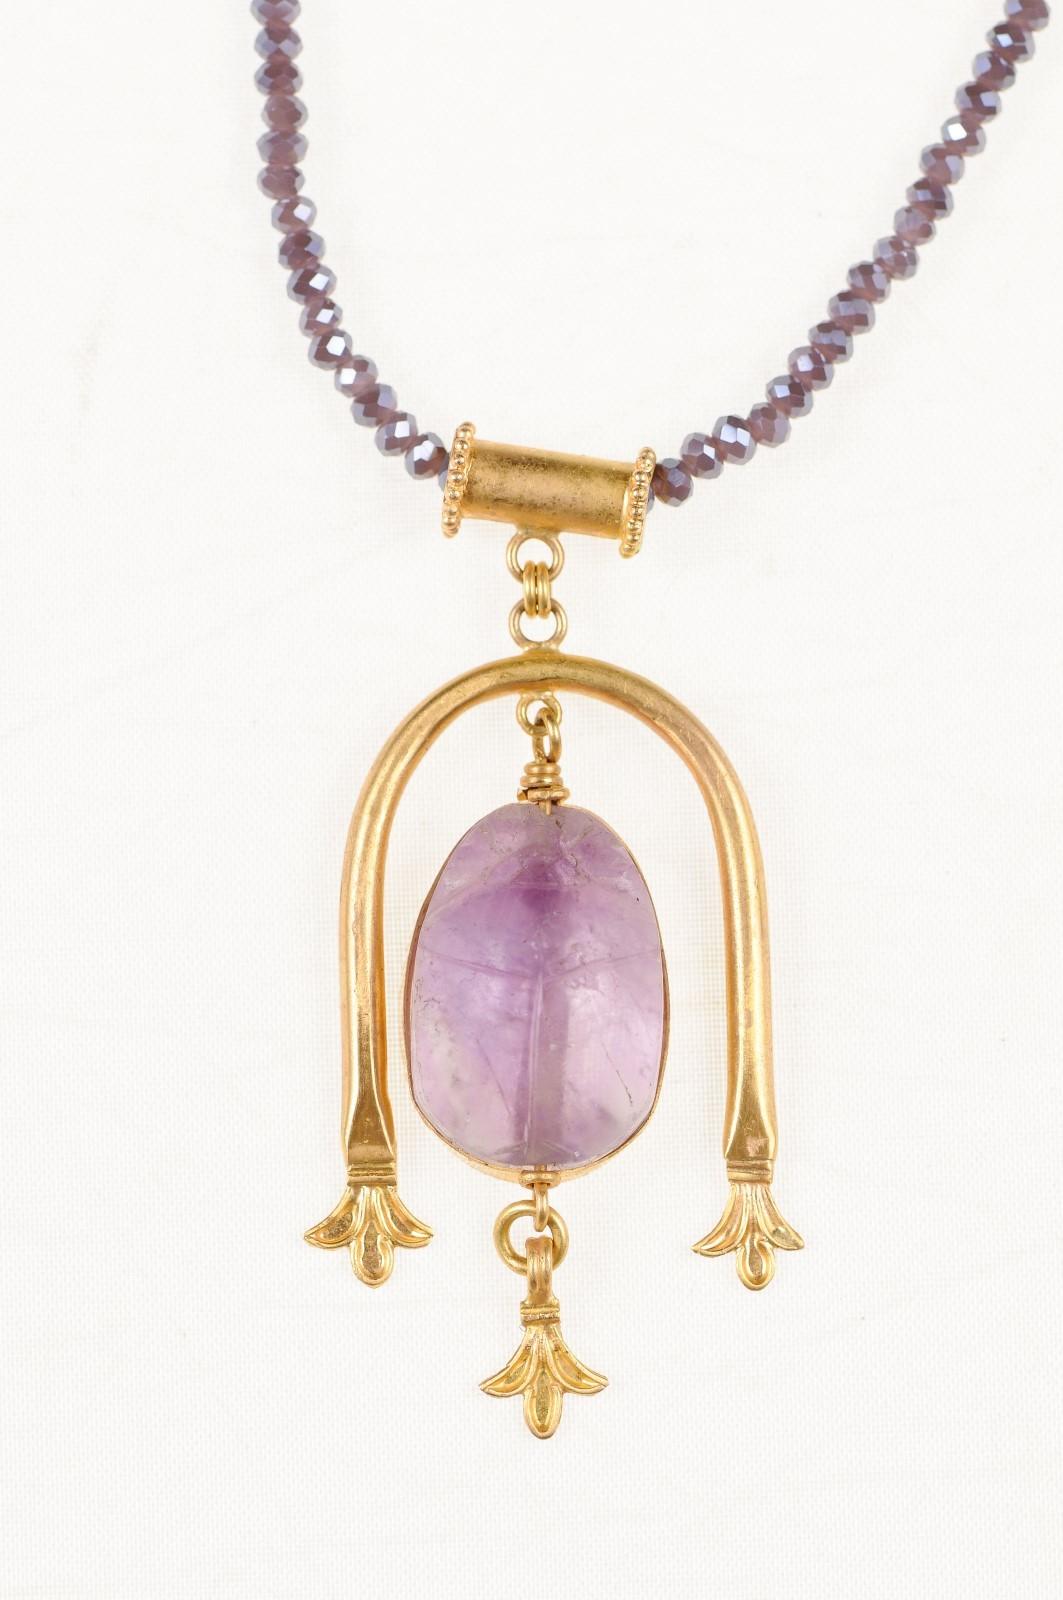 Roman Egyptian 100 AD Lavender Colored Scarab and 21-Karat Gold Pendant In Good Condition For Sale In Atlanta, GA